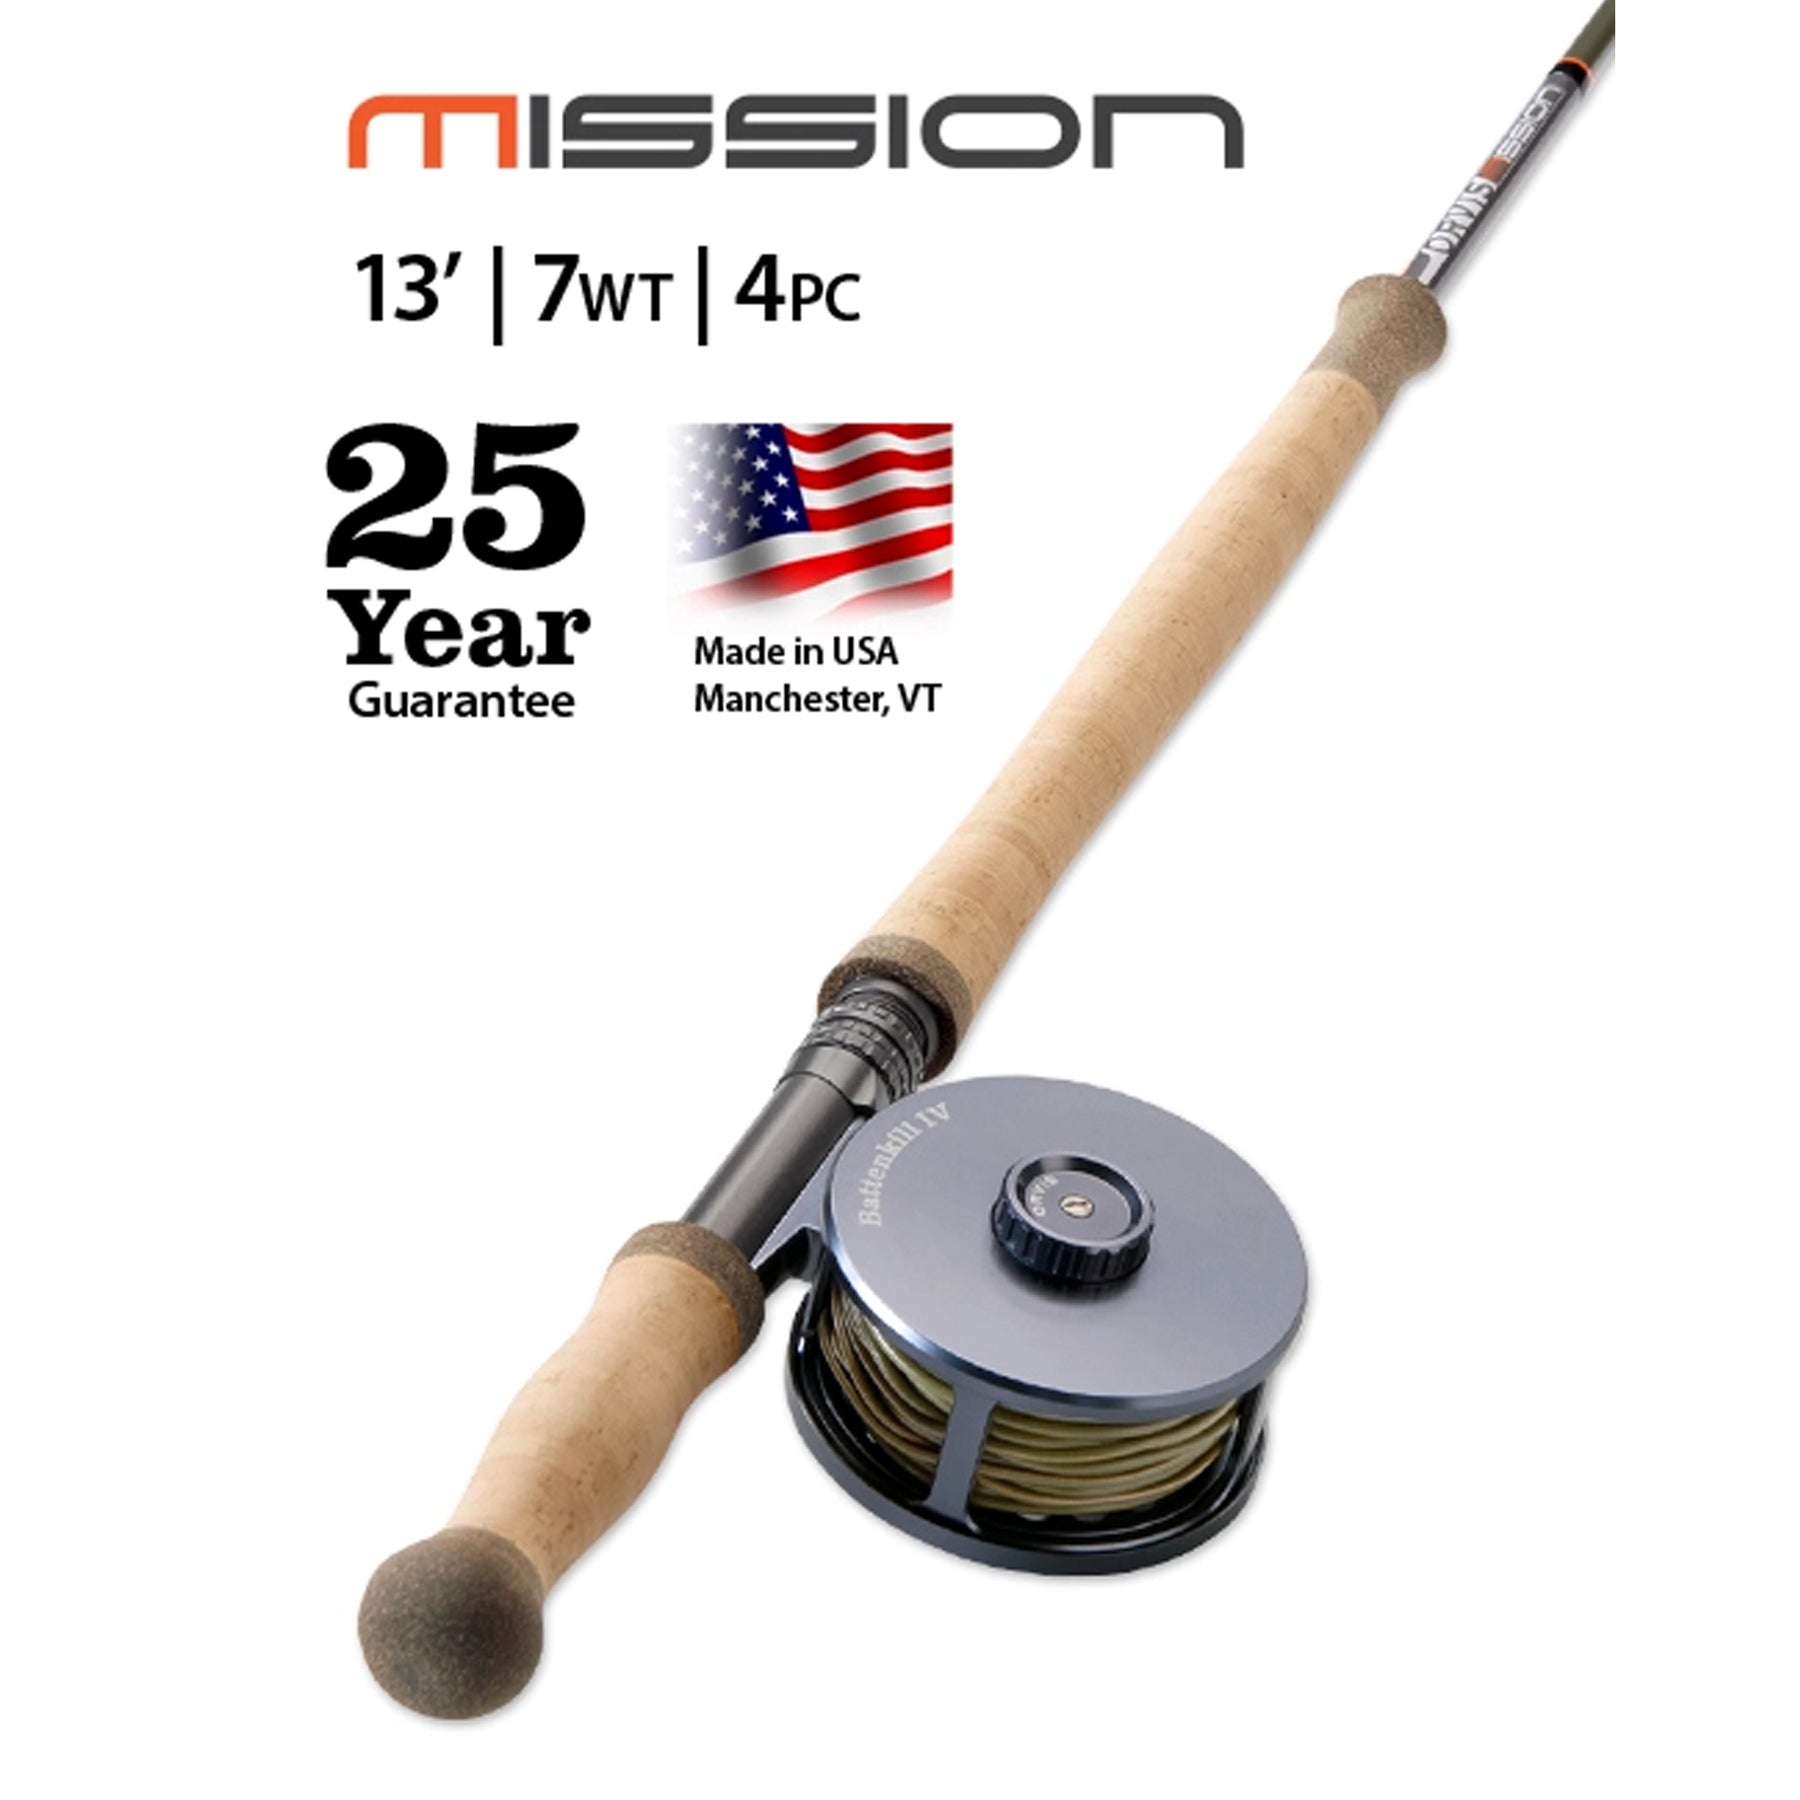 Orvis Helios 2 One Piece Fly Rod Overview - Casters Fly Shop